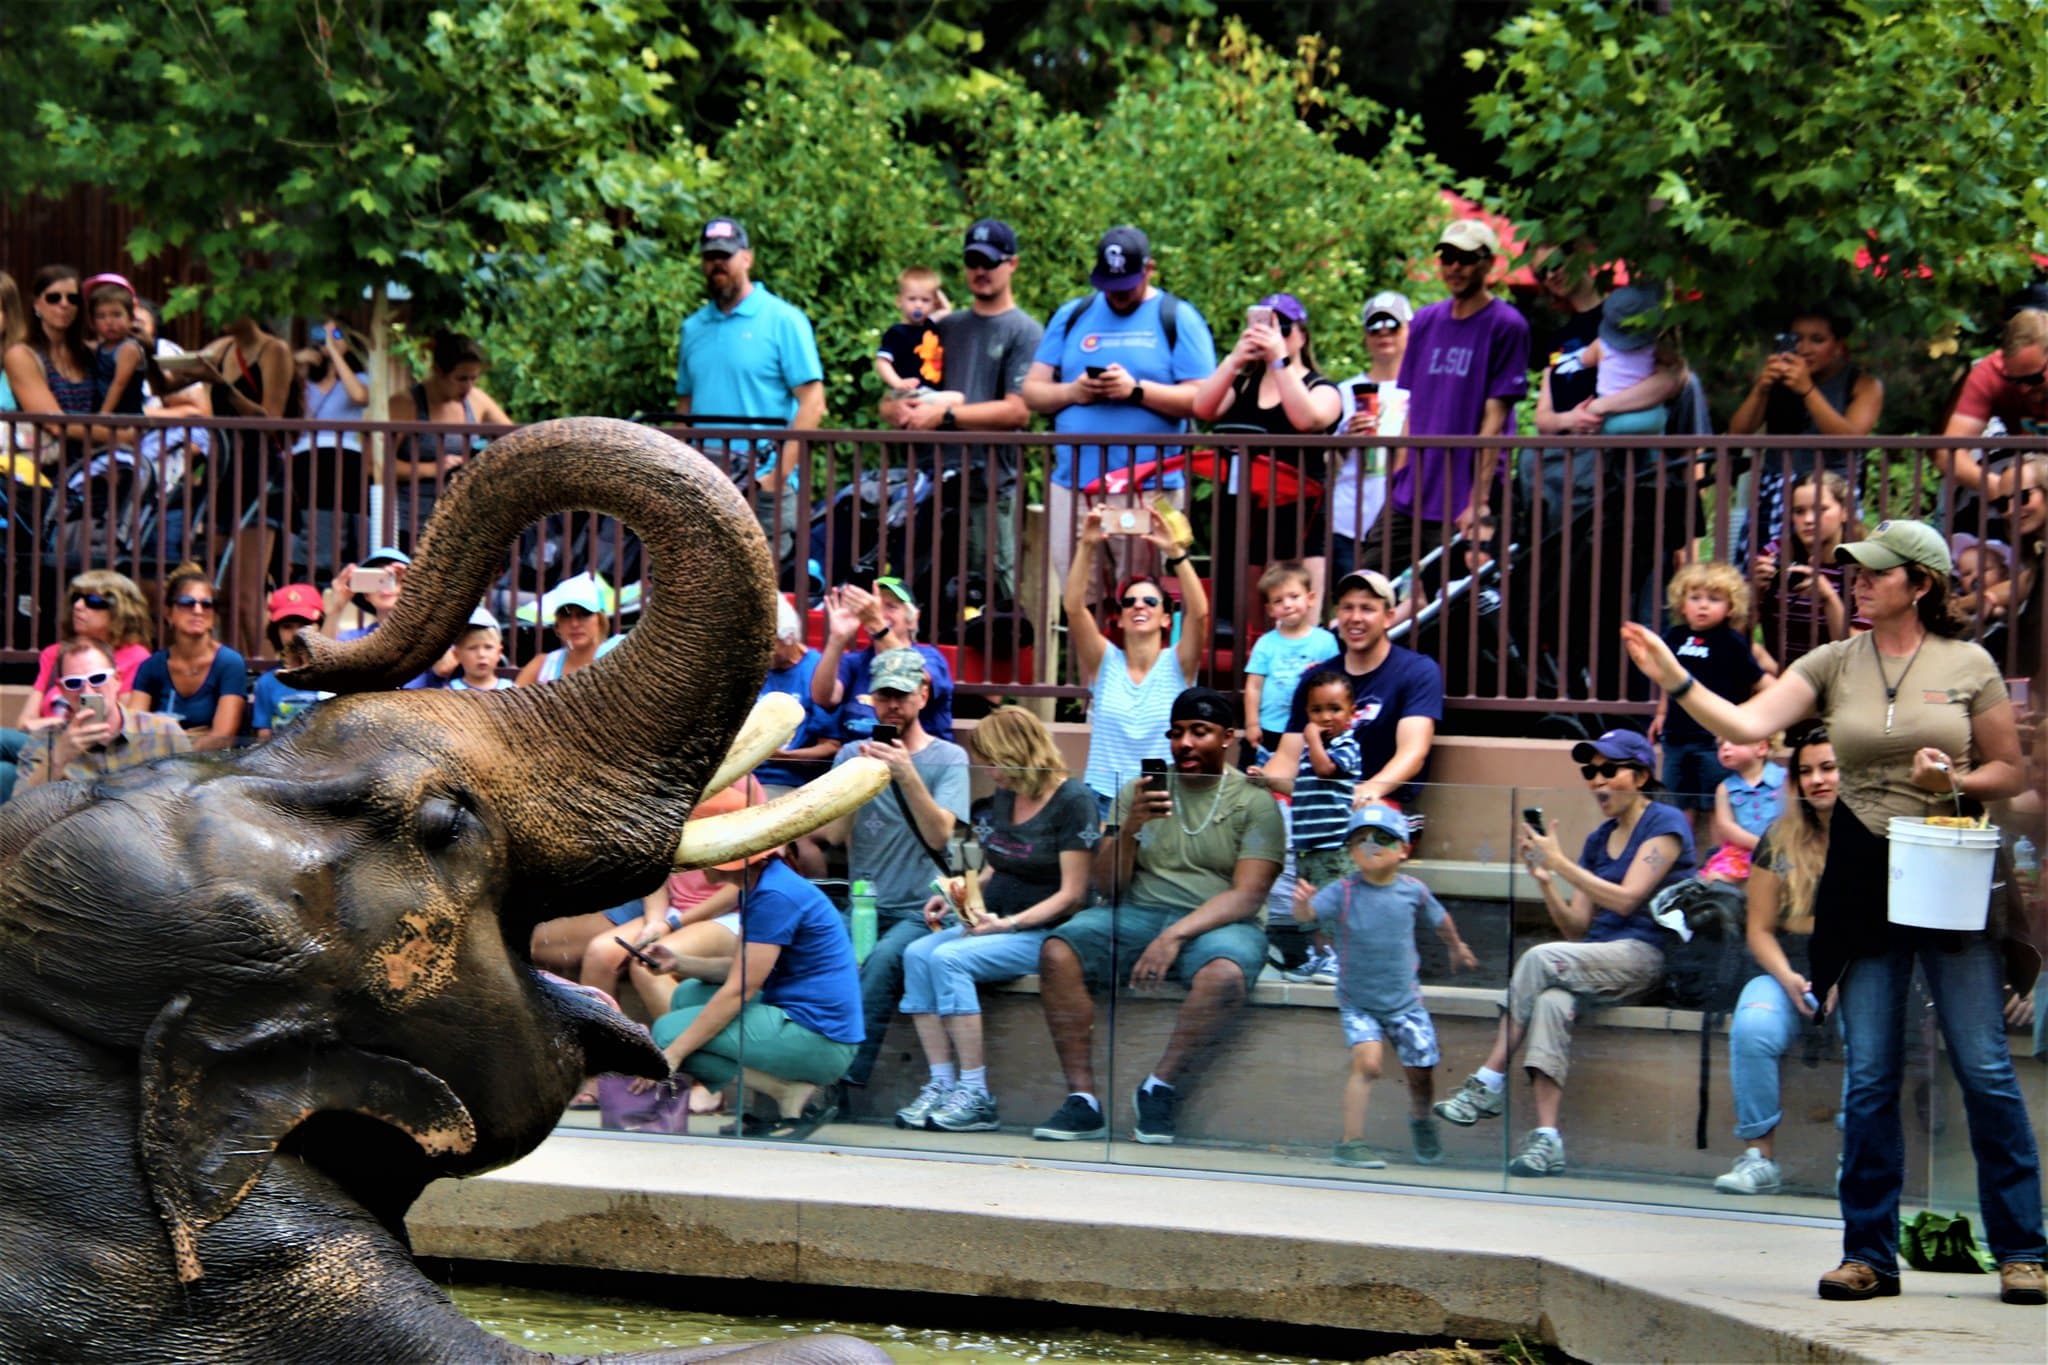 Crowd of people at zoo watching as zookeeper feeds and elephant